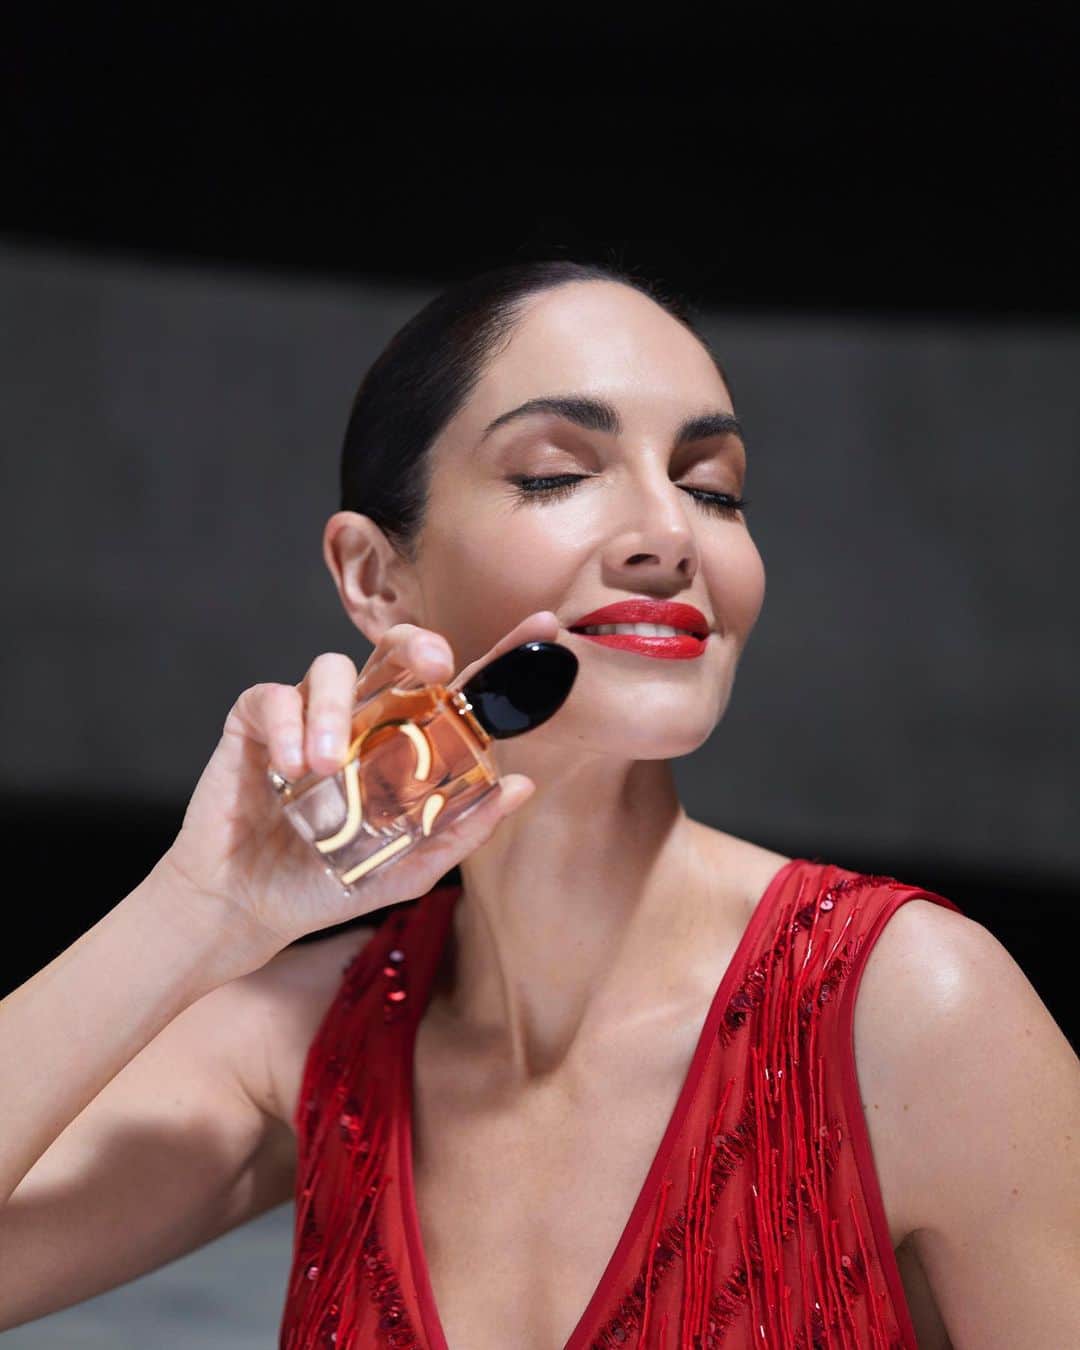 Armani Beautyのインスタグラム：「Say Sì to a new intense scent for the Holiday Season. Embrace the infinite possibilites during the Holidays with the new hyper-sensory SÌ EAU DE PARFUM INTENSE, which features a blend of blackcurrant nectar, a velvety floral heart, and a sensual vanilla bouquet to create a unique and inviting fragrance.   #Armanibeauty #ArmaniSi #SaySi #Fragrance #HolidayFragrance」